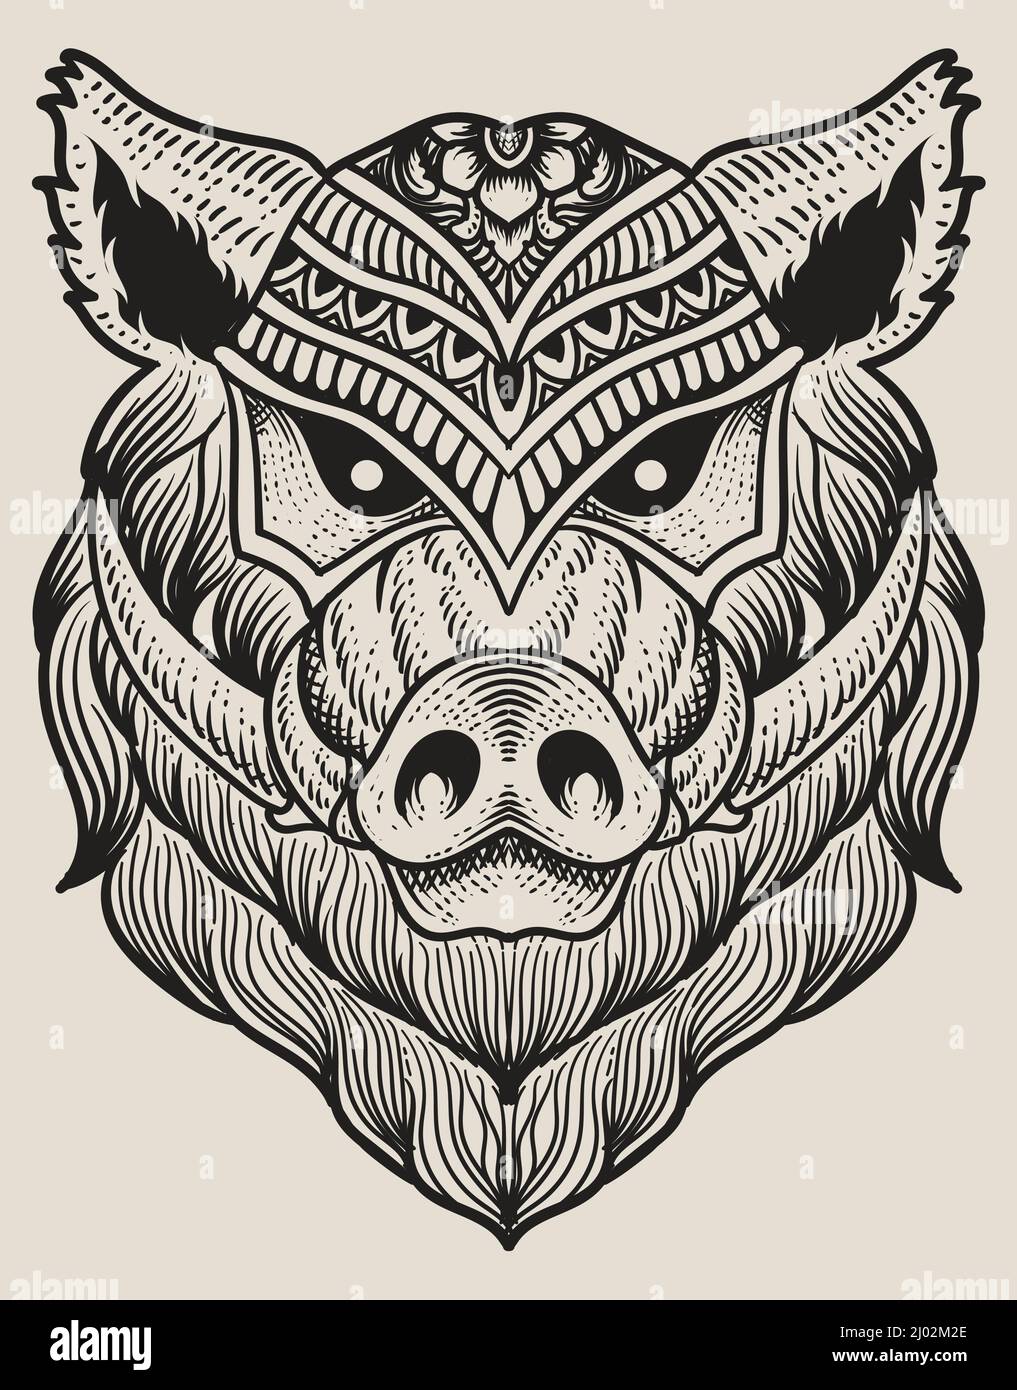 illustration wild boar head engraving style with mask Stock Vector